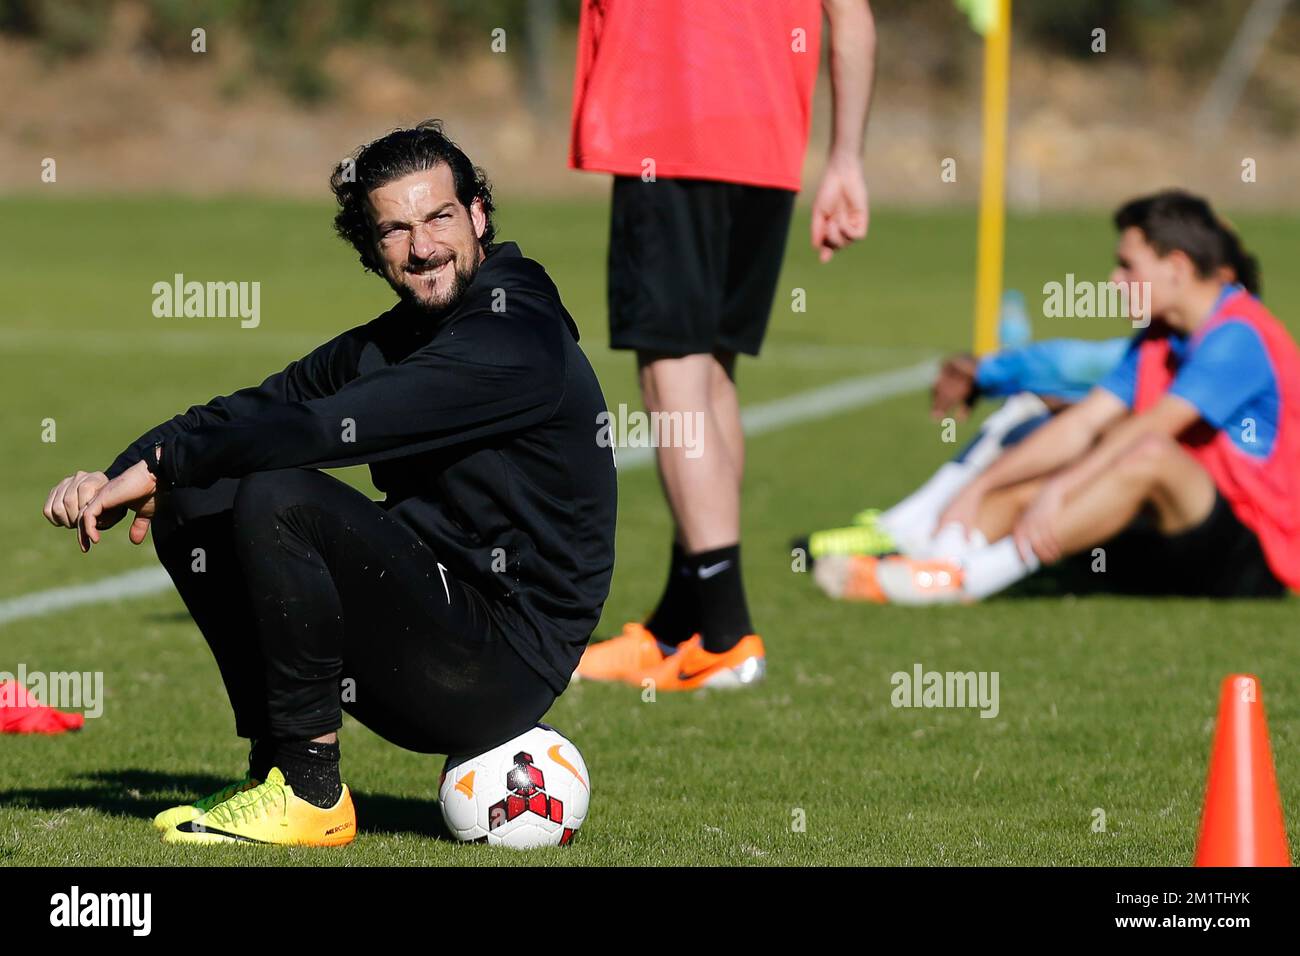 20140106 - SAN ROQUE, SPAIN: Club's goalkeeper trainer Ricardo Lopez pictured during a training session on the third day of the winter camp of Belgian first division soccer team Club Brugge KV in San Roque, Spain, Monday 06 January 2014. BELGA PHOTO BRUNO FAHY Stock Photo